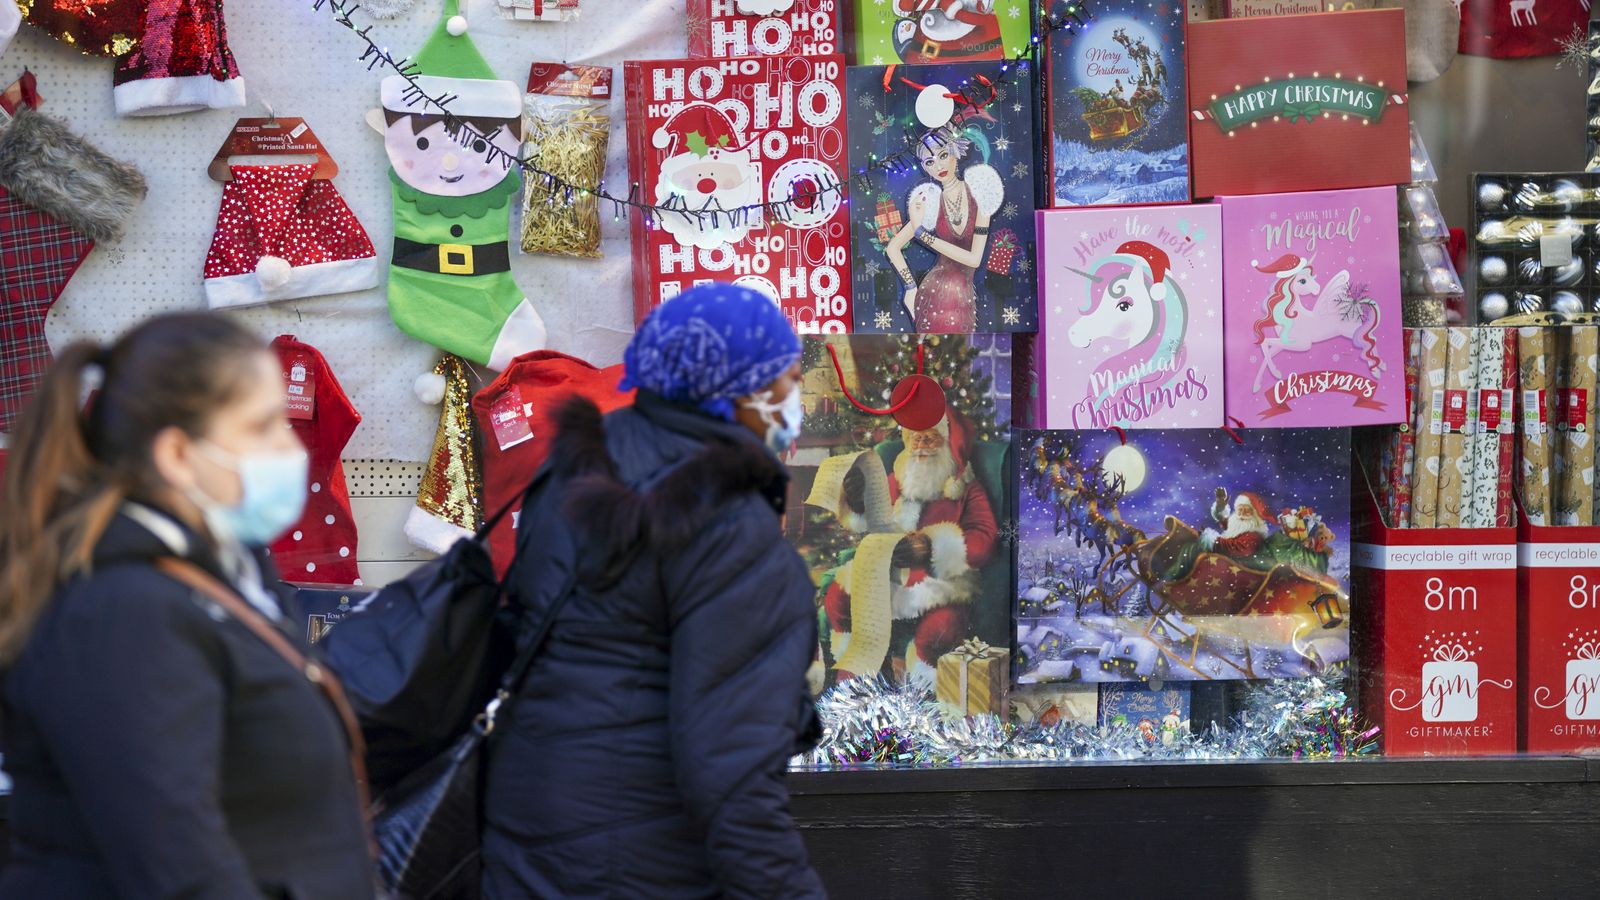 COVID: UK could see ‘more stringent measures’ in New Year after Christmas mixing, expert says